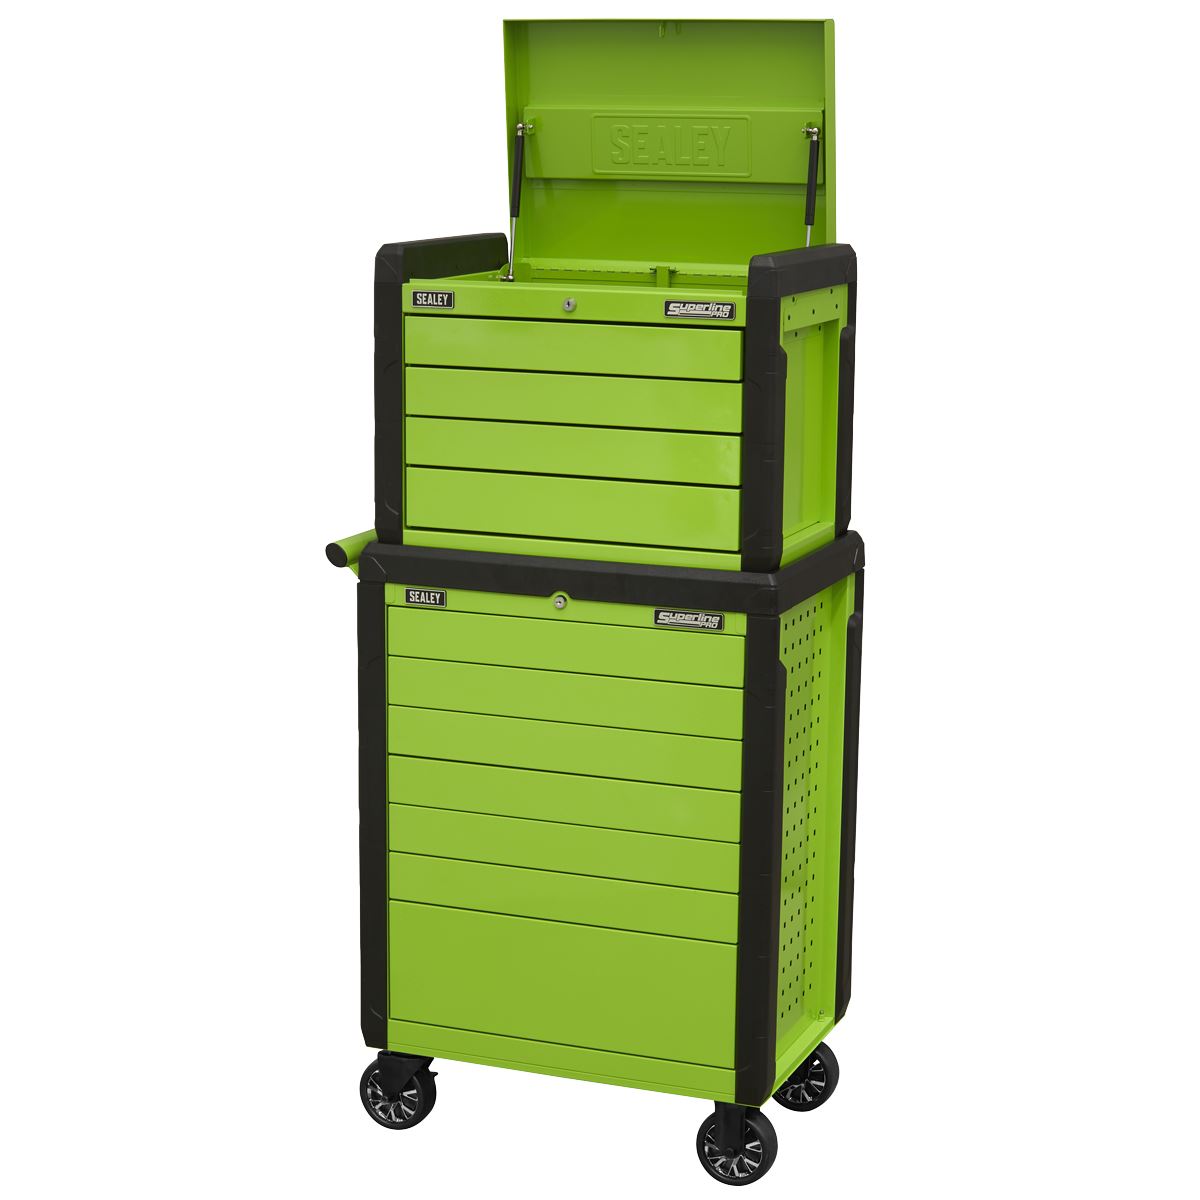 Sealey Superline Pro Topchest & Rollcab Combination 11 Drawer Push-To-Open - Green